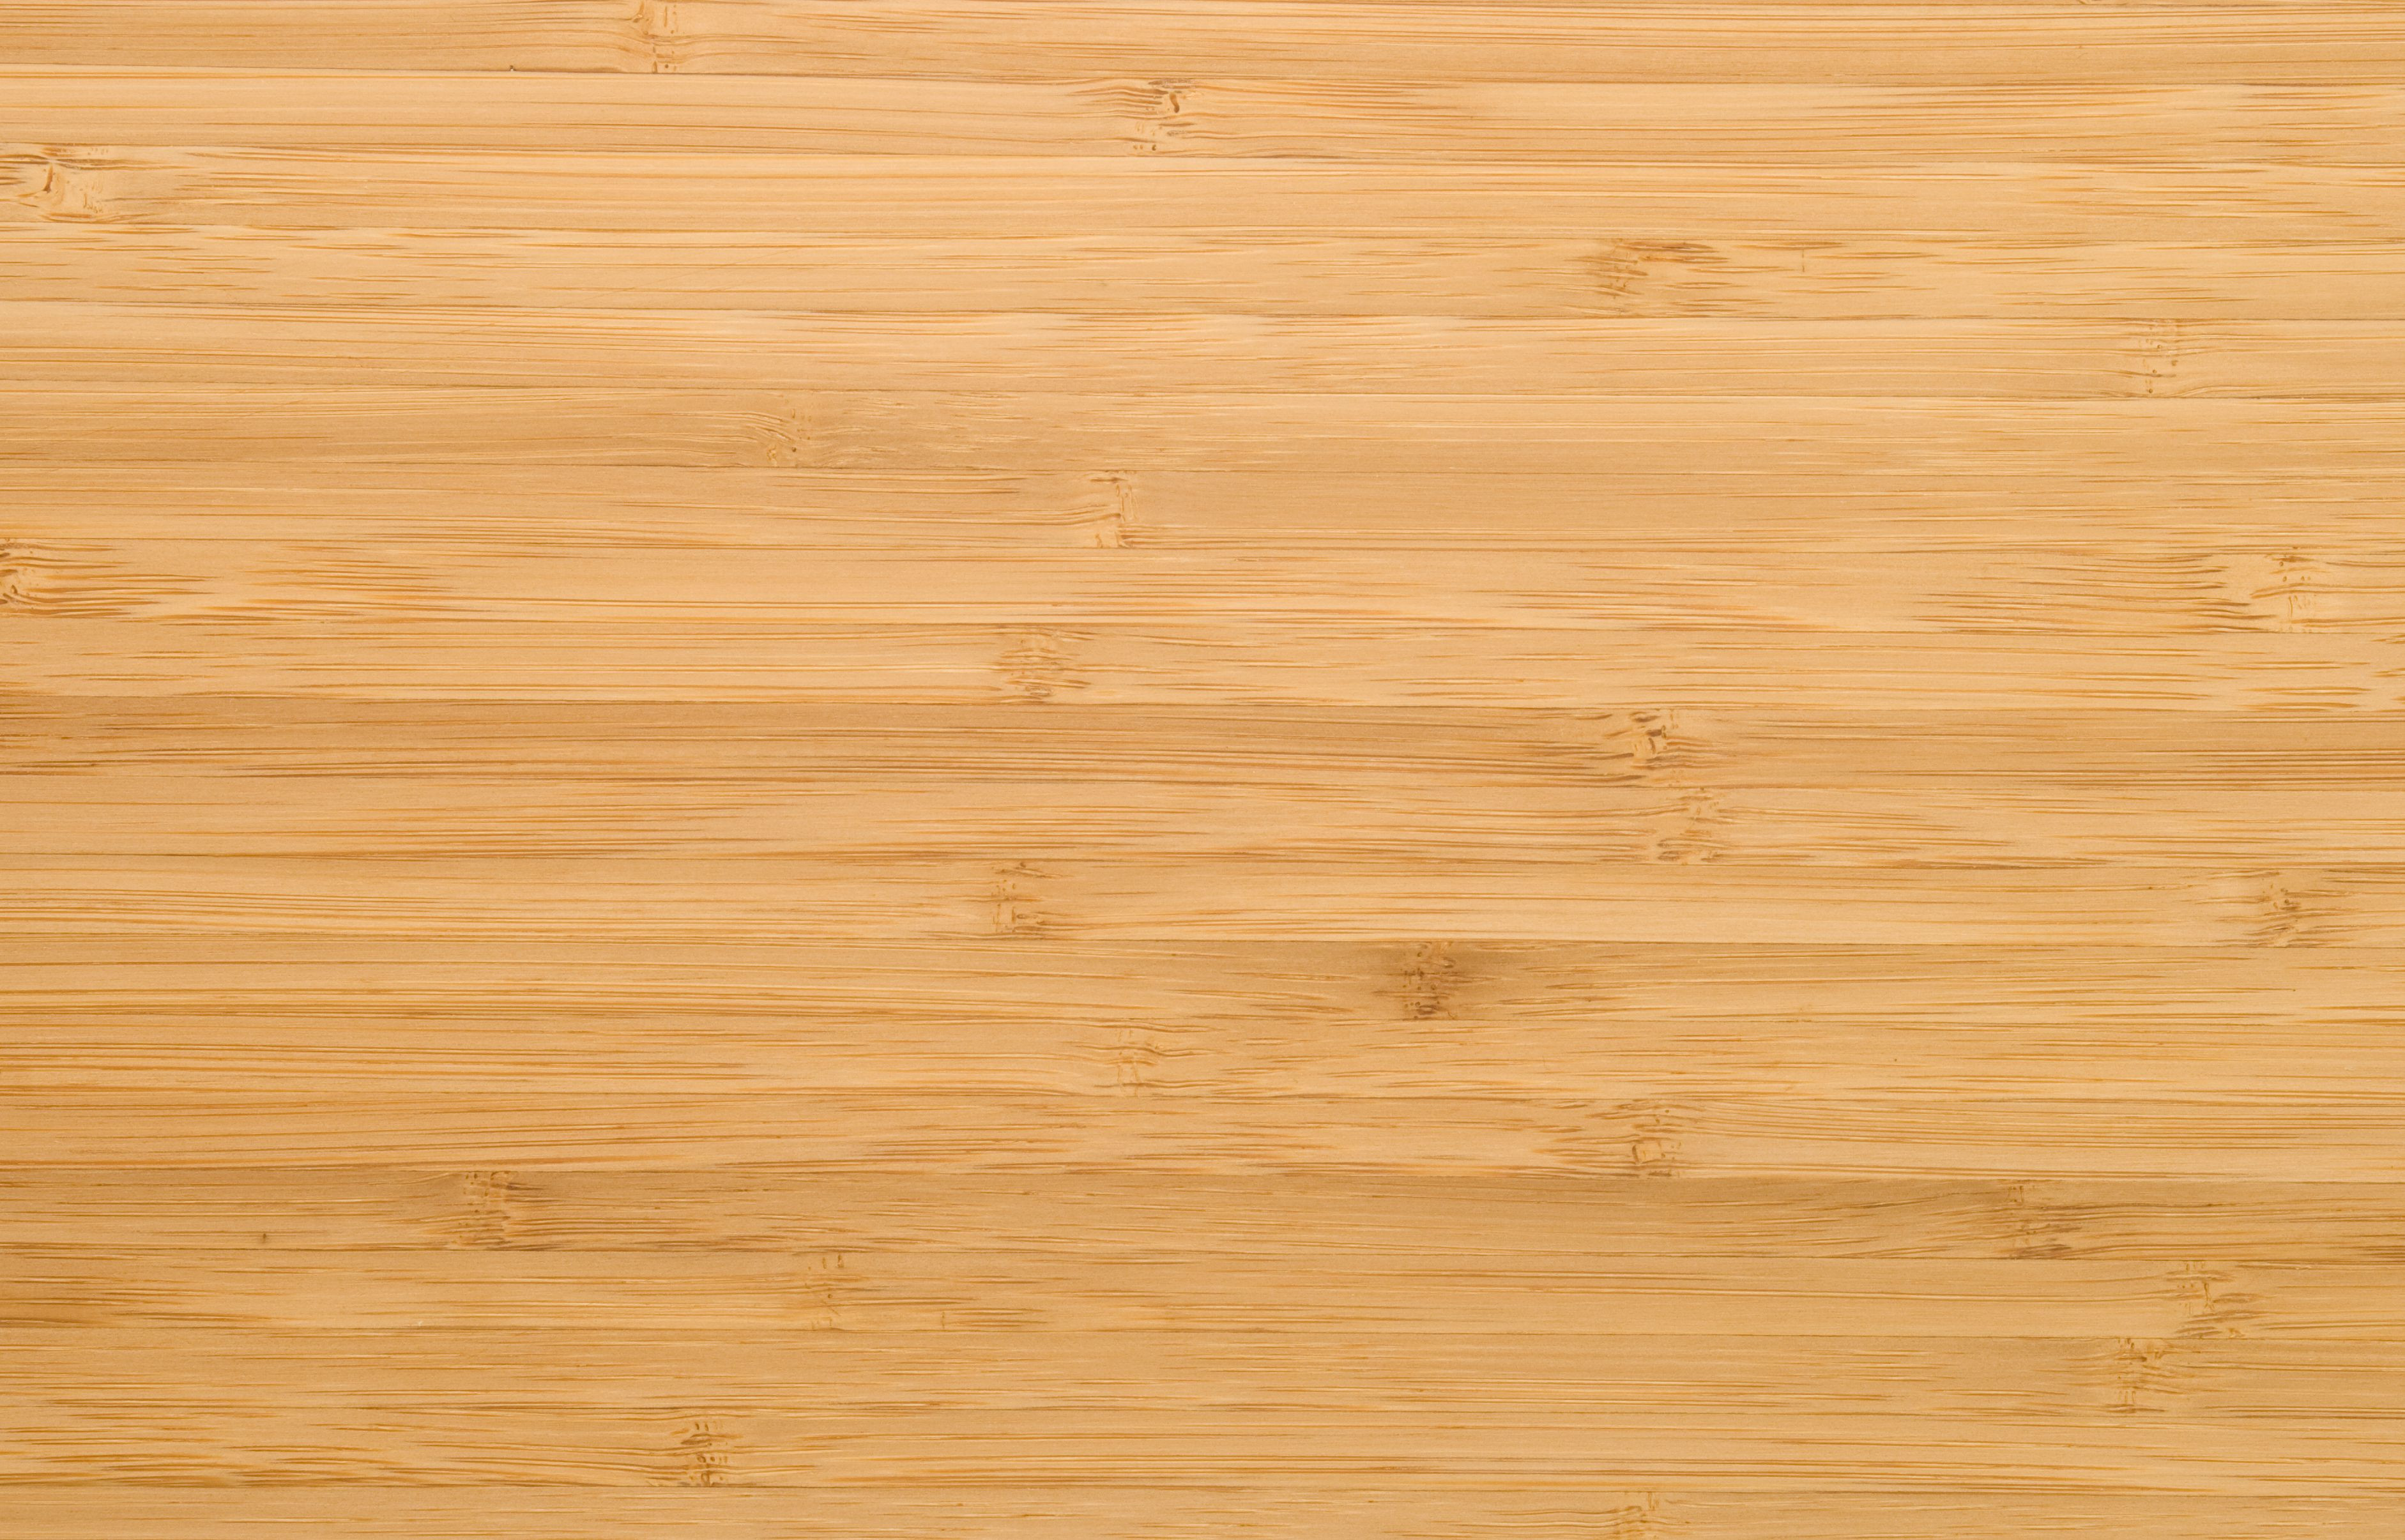 10 Stylish Hardwood Floor Cleaning Tips 2024 free download hardwood floor cleaning tips of can you use a wet mop on bamboo floors for natural bamboo plank 94259870 59aeefd4519de20010d5c648